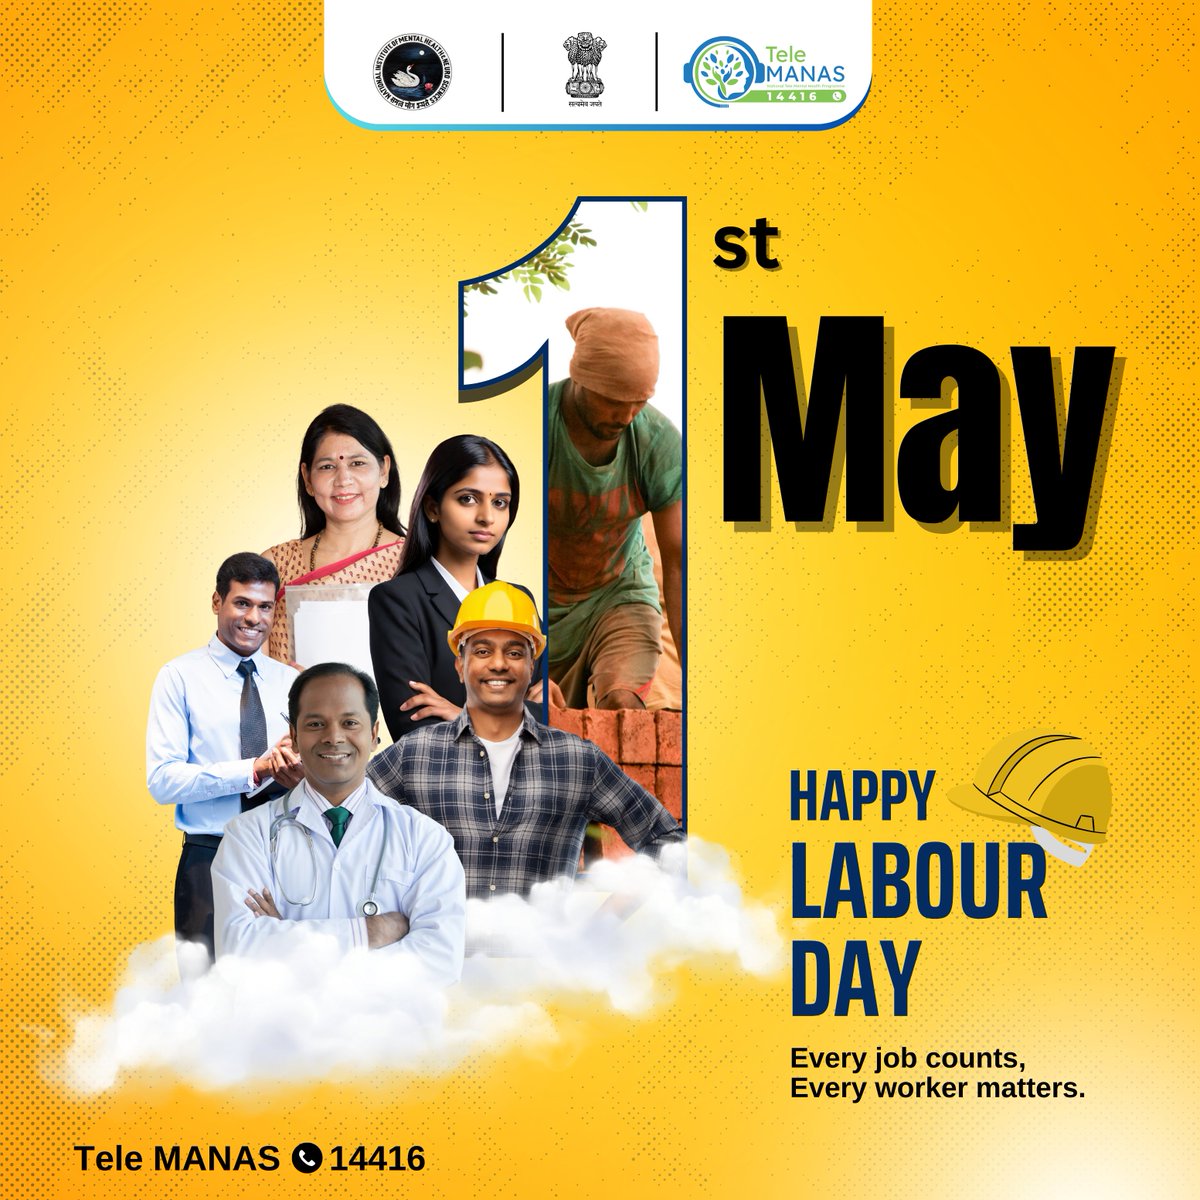 Happy Labour Day! Remember, taking care of your mental health is just as important as any job. Reach out to Tele MANAS at 14416 for support and guidance. 

#MentalHealthMatters #LabourDay